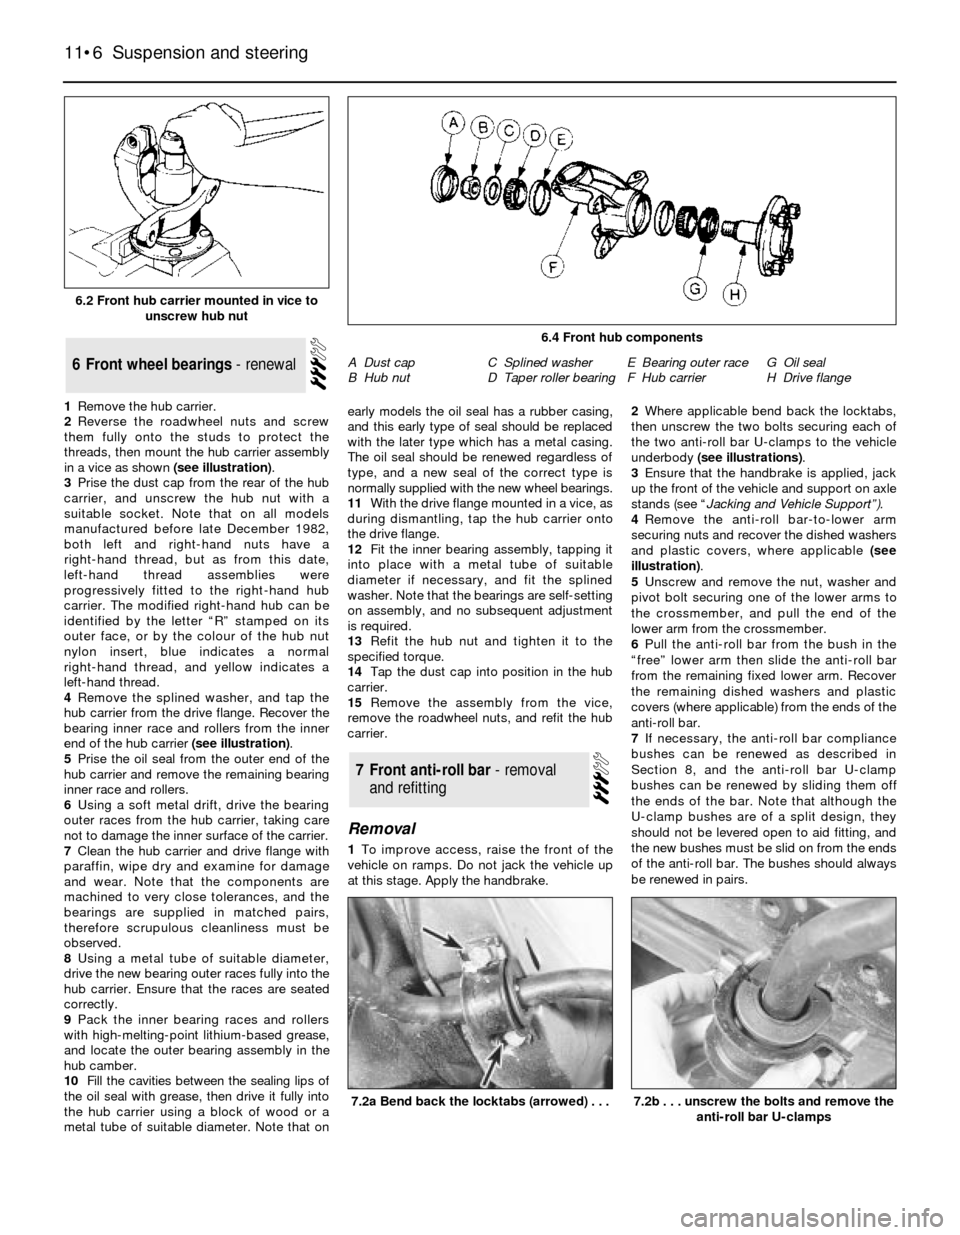 FORD SIERRA 1985 1.G Suspension And Steering Workshop Manual 1Remove the hub carrier.
2Reverse the roadwheel nuts and screw
them fully onto the studs to protect the
threads, then mount the hub carrier assembly
in a vice as shown (see illustration).
3Prise the d